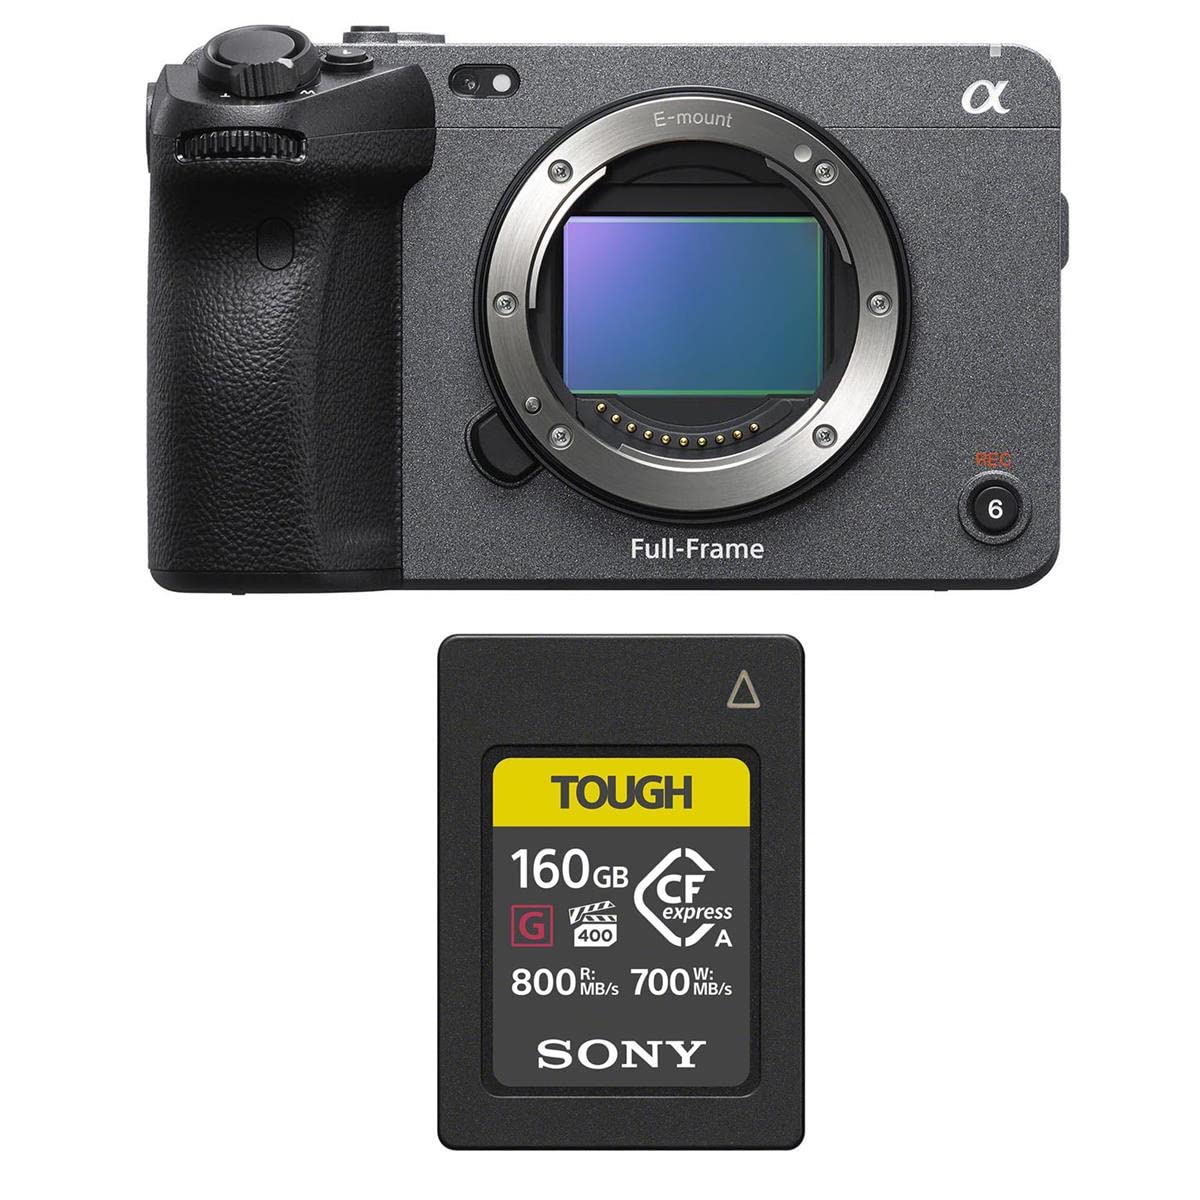 Sony Alpha FX3 Full-Frame Cinema Line Camera Bundle, with Sony Tough 160GB CFexpress Type A Memory Card for Digital Video Full Frame Camera